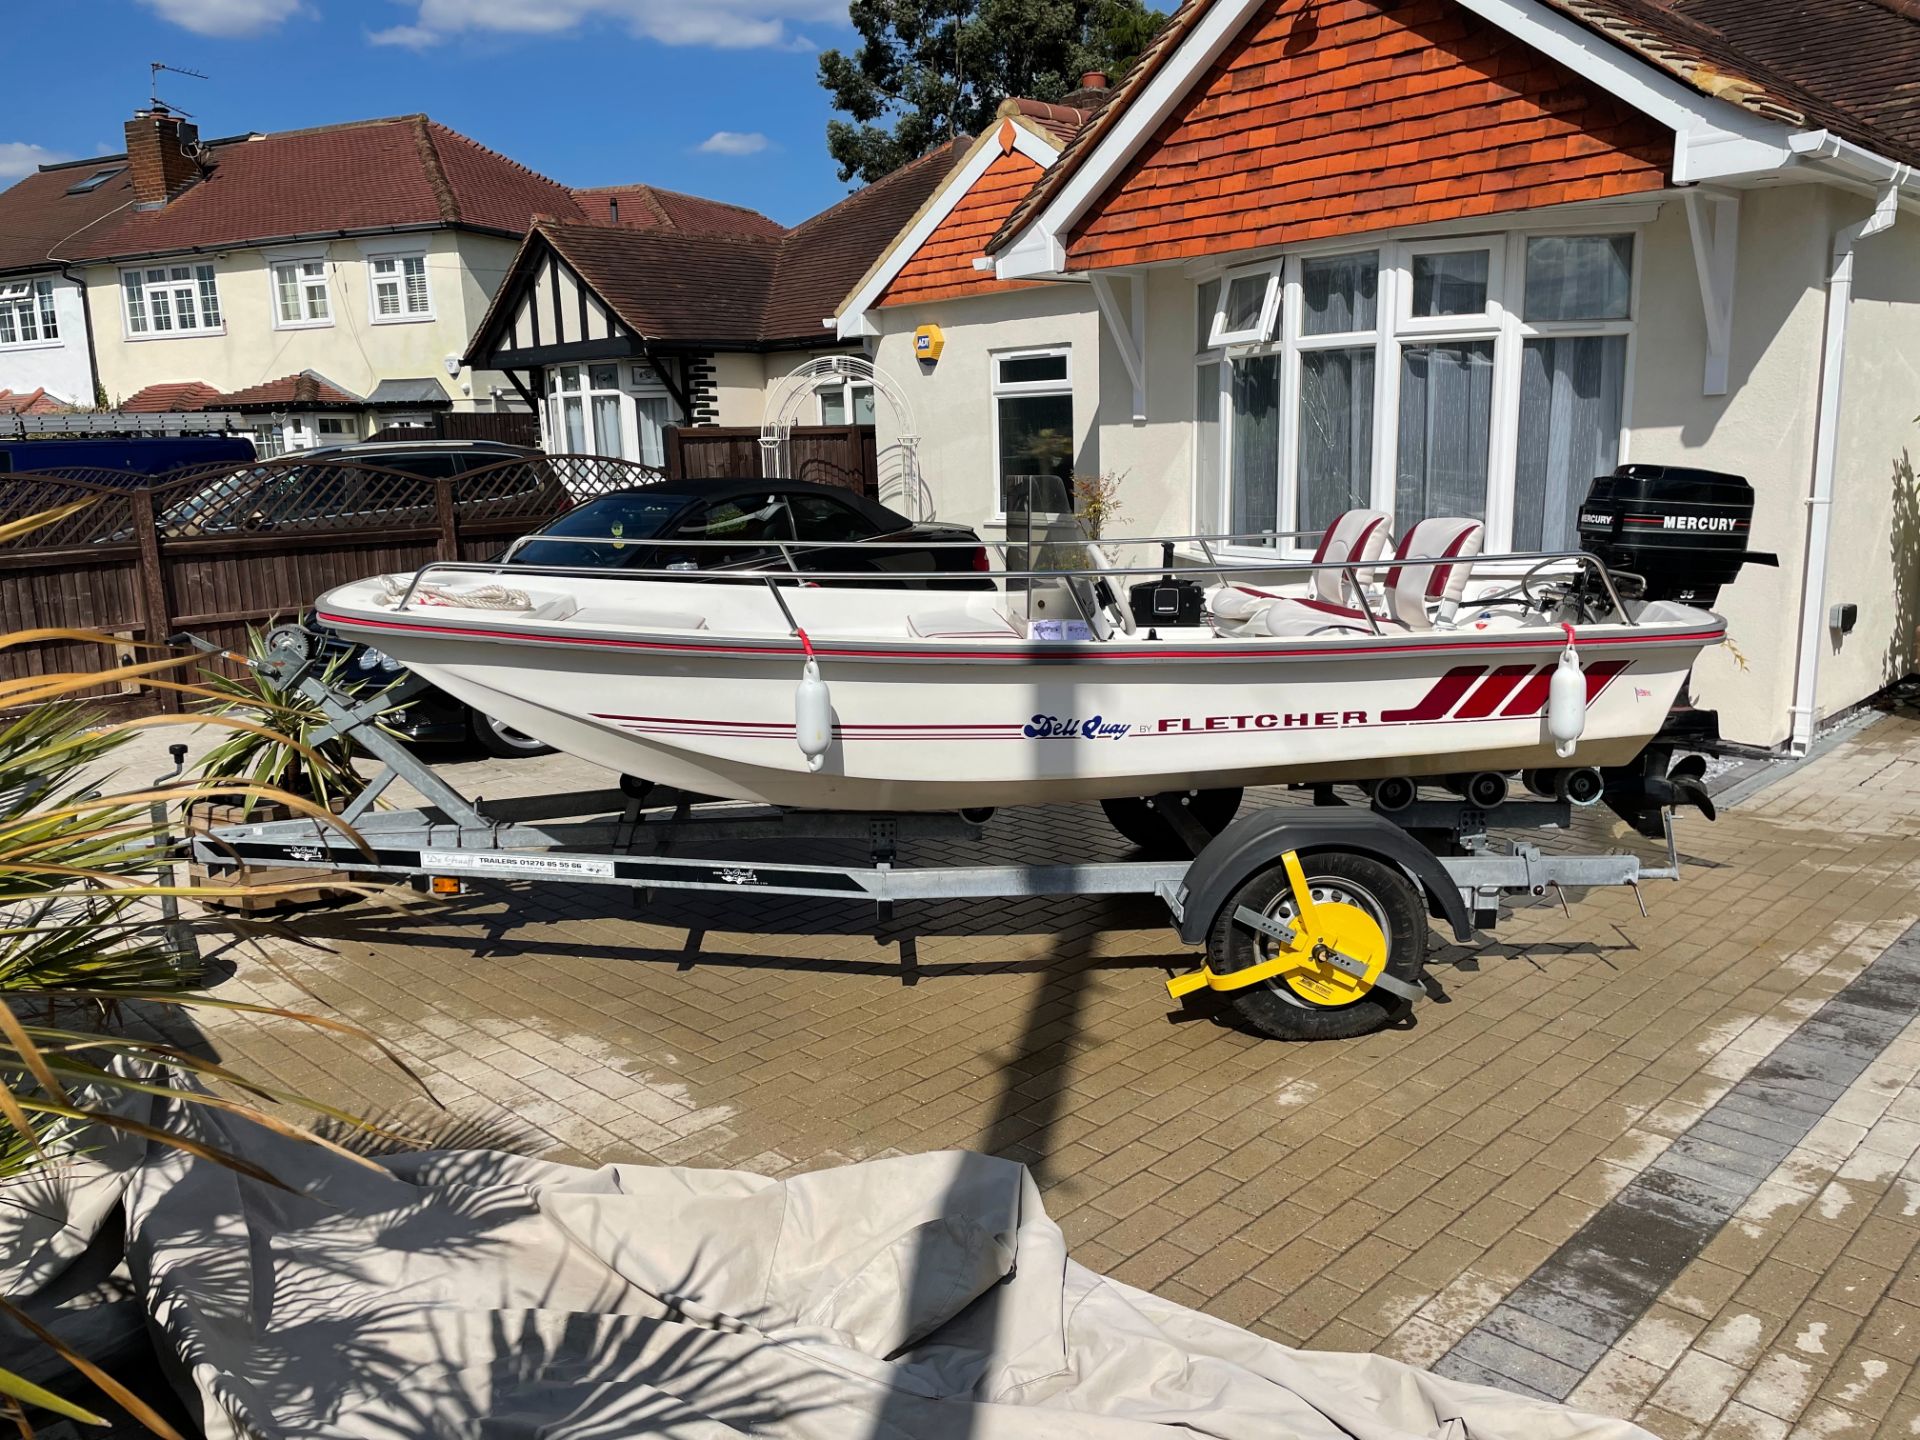 FLETCHER DORY 13 SPEED BOAT, VERY RARE MODEL, C/W 750kg DE GRAAFF TRAILER AND ALL ACCESSORIES - Image 3 of 12